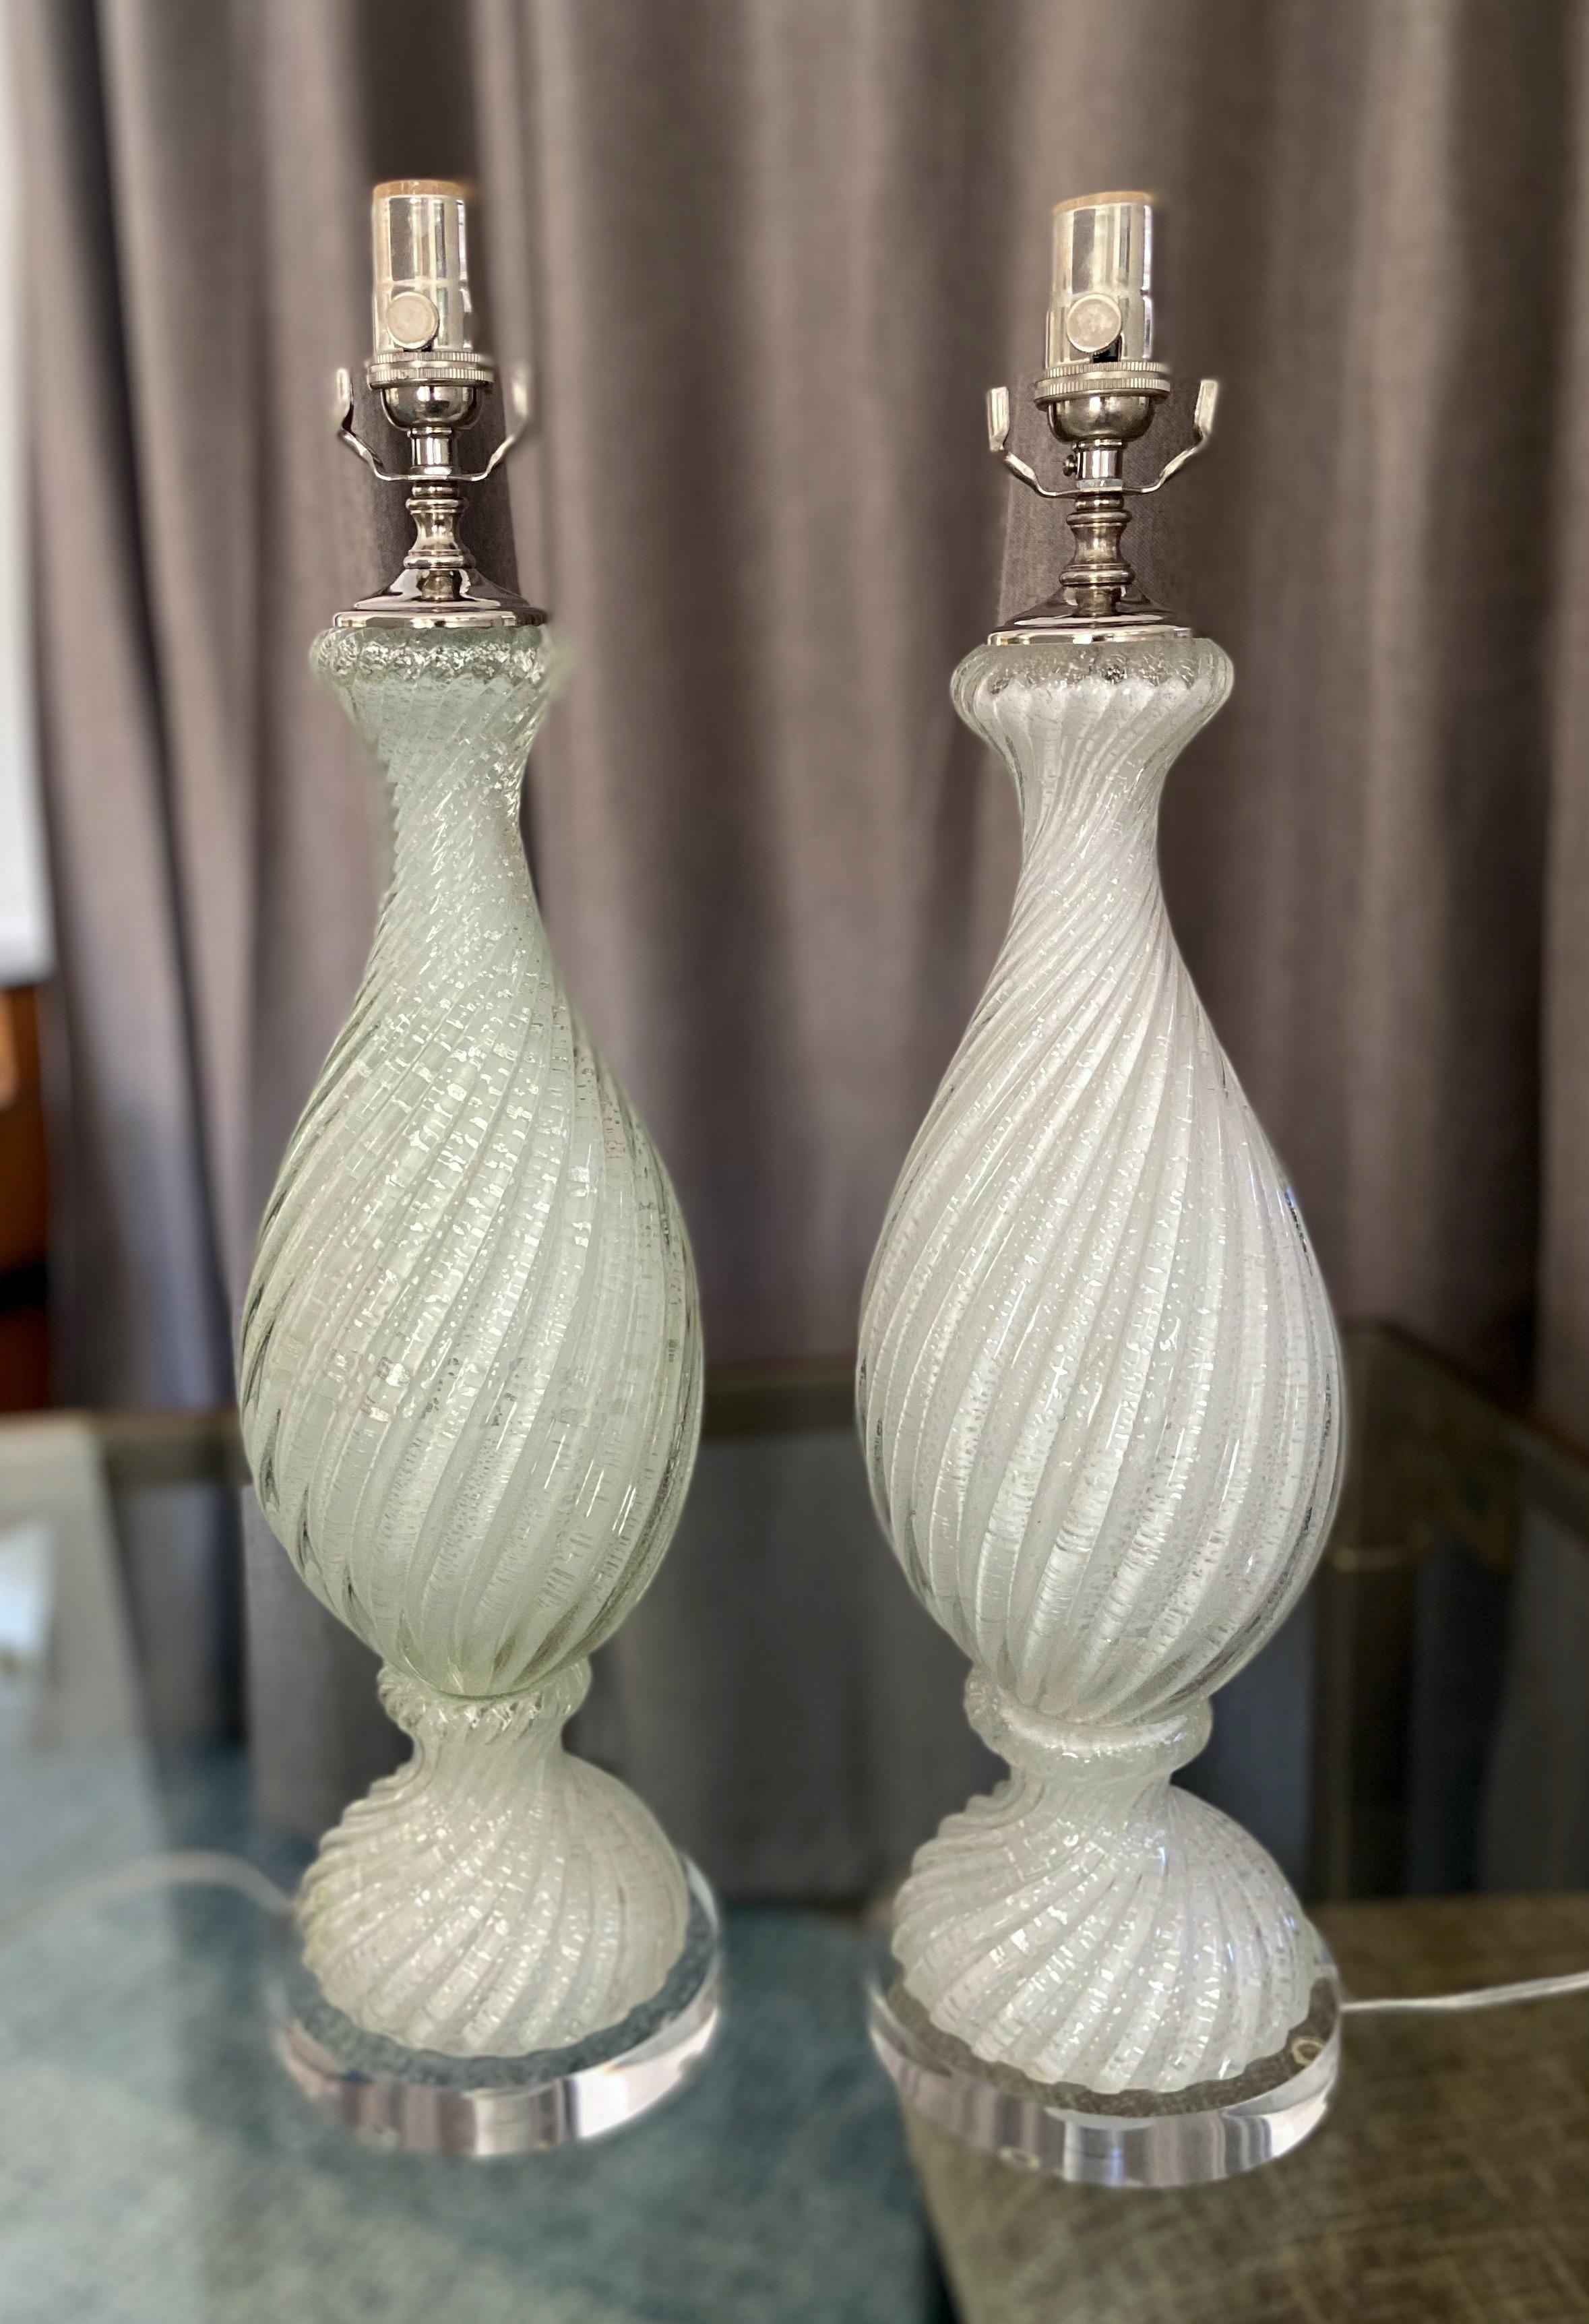 Pair of Murano Italian hand blown white twisted glass table lamps with silver mica flecks throughout on custom acrylic base. Rewired with new polished nickel fittings including new three way sockets and cords. This handsome lamp trikes the perfect